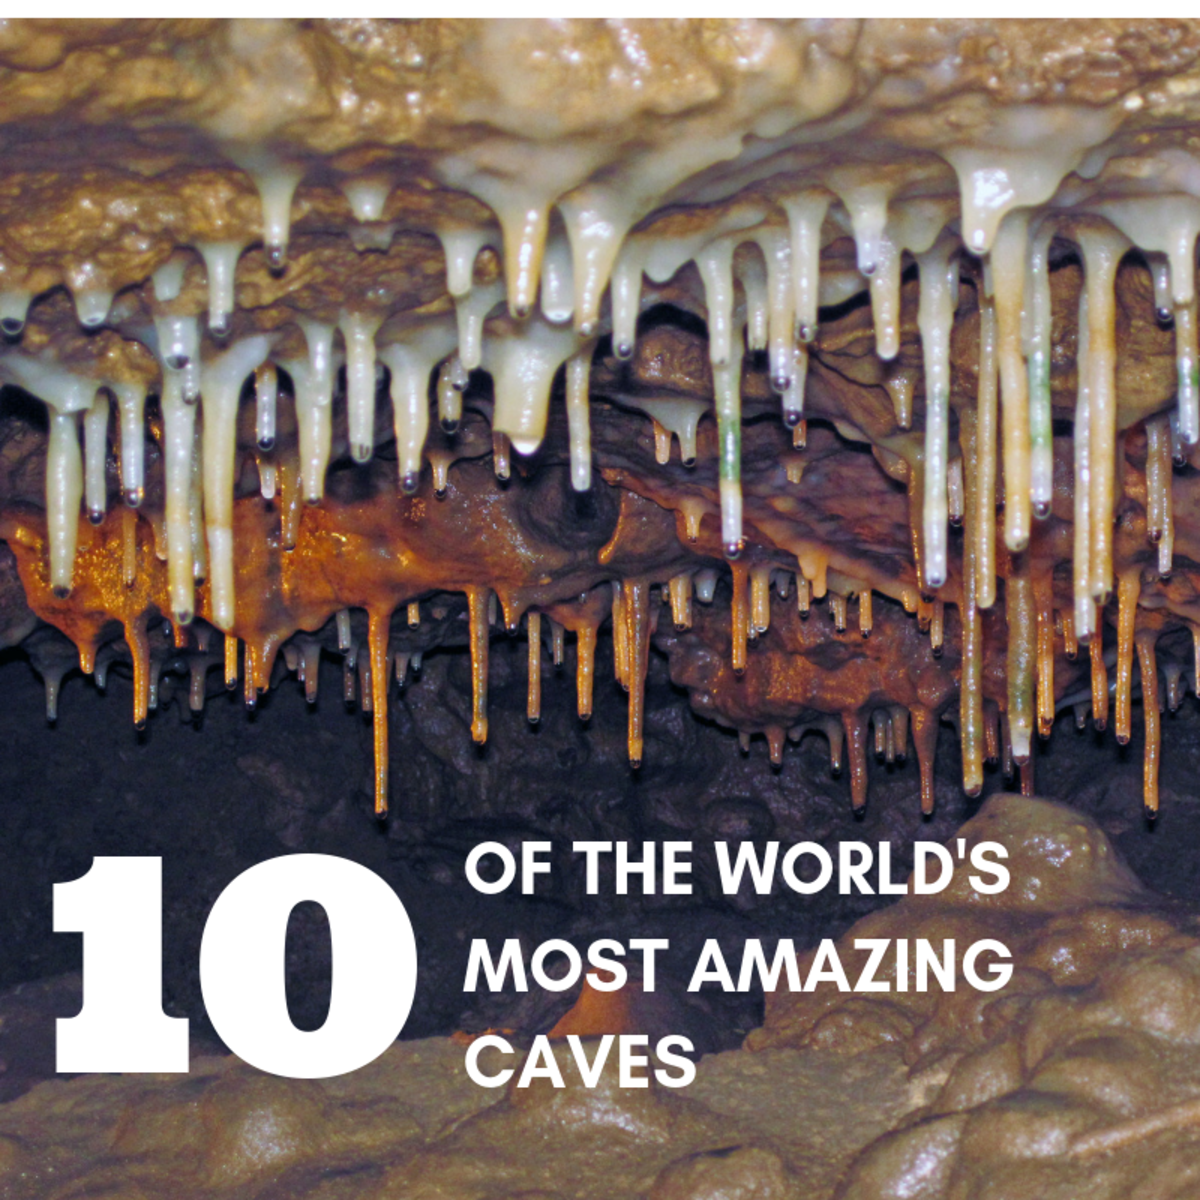 These 10 caves are among the world's most spectacular subterranean destinations.